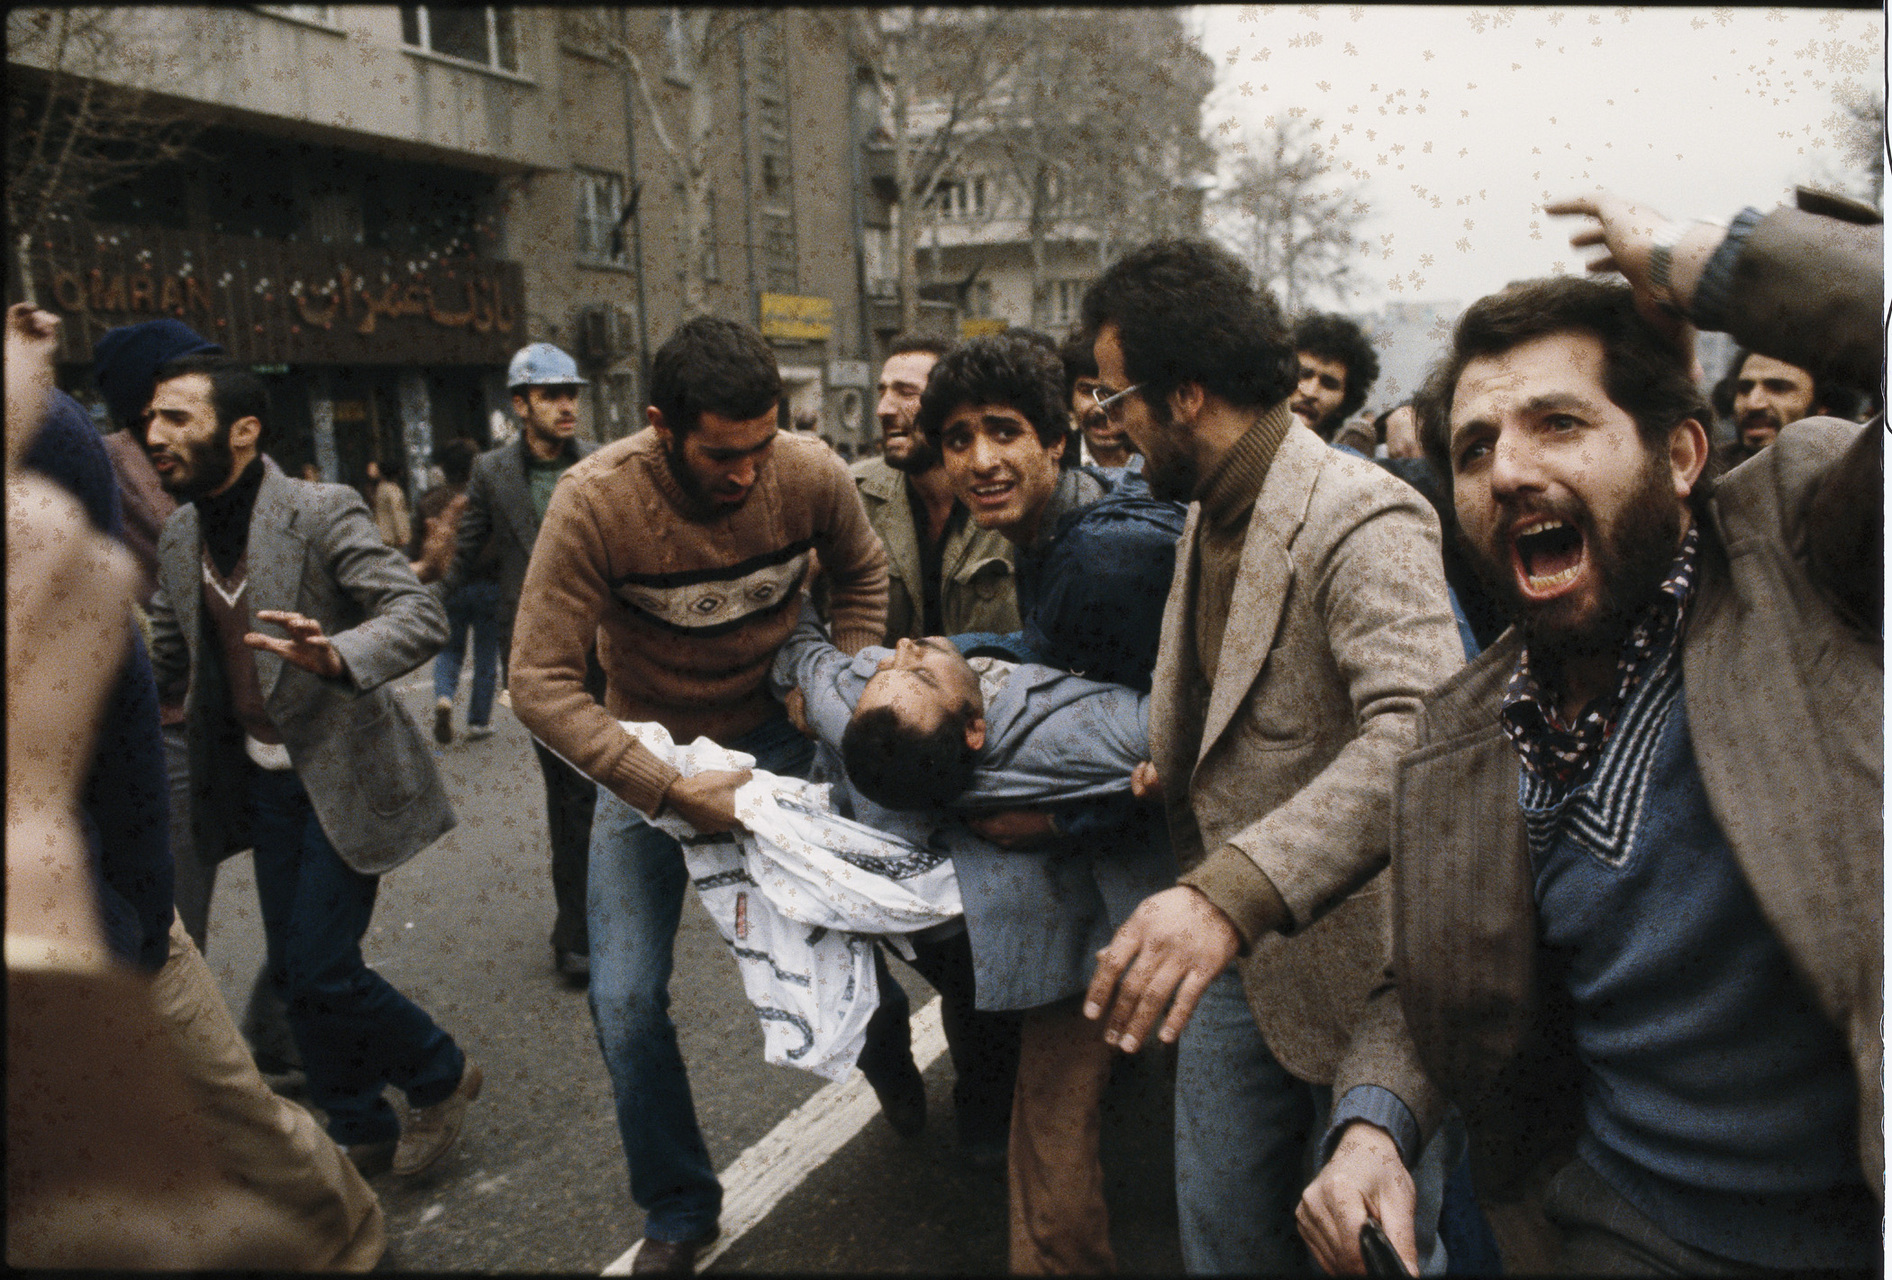 Wounded demonstrators are carried to an ambulance.